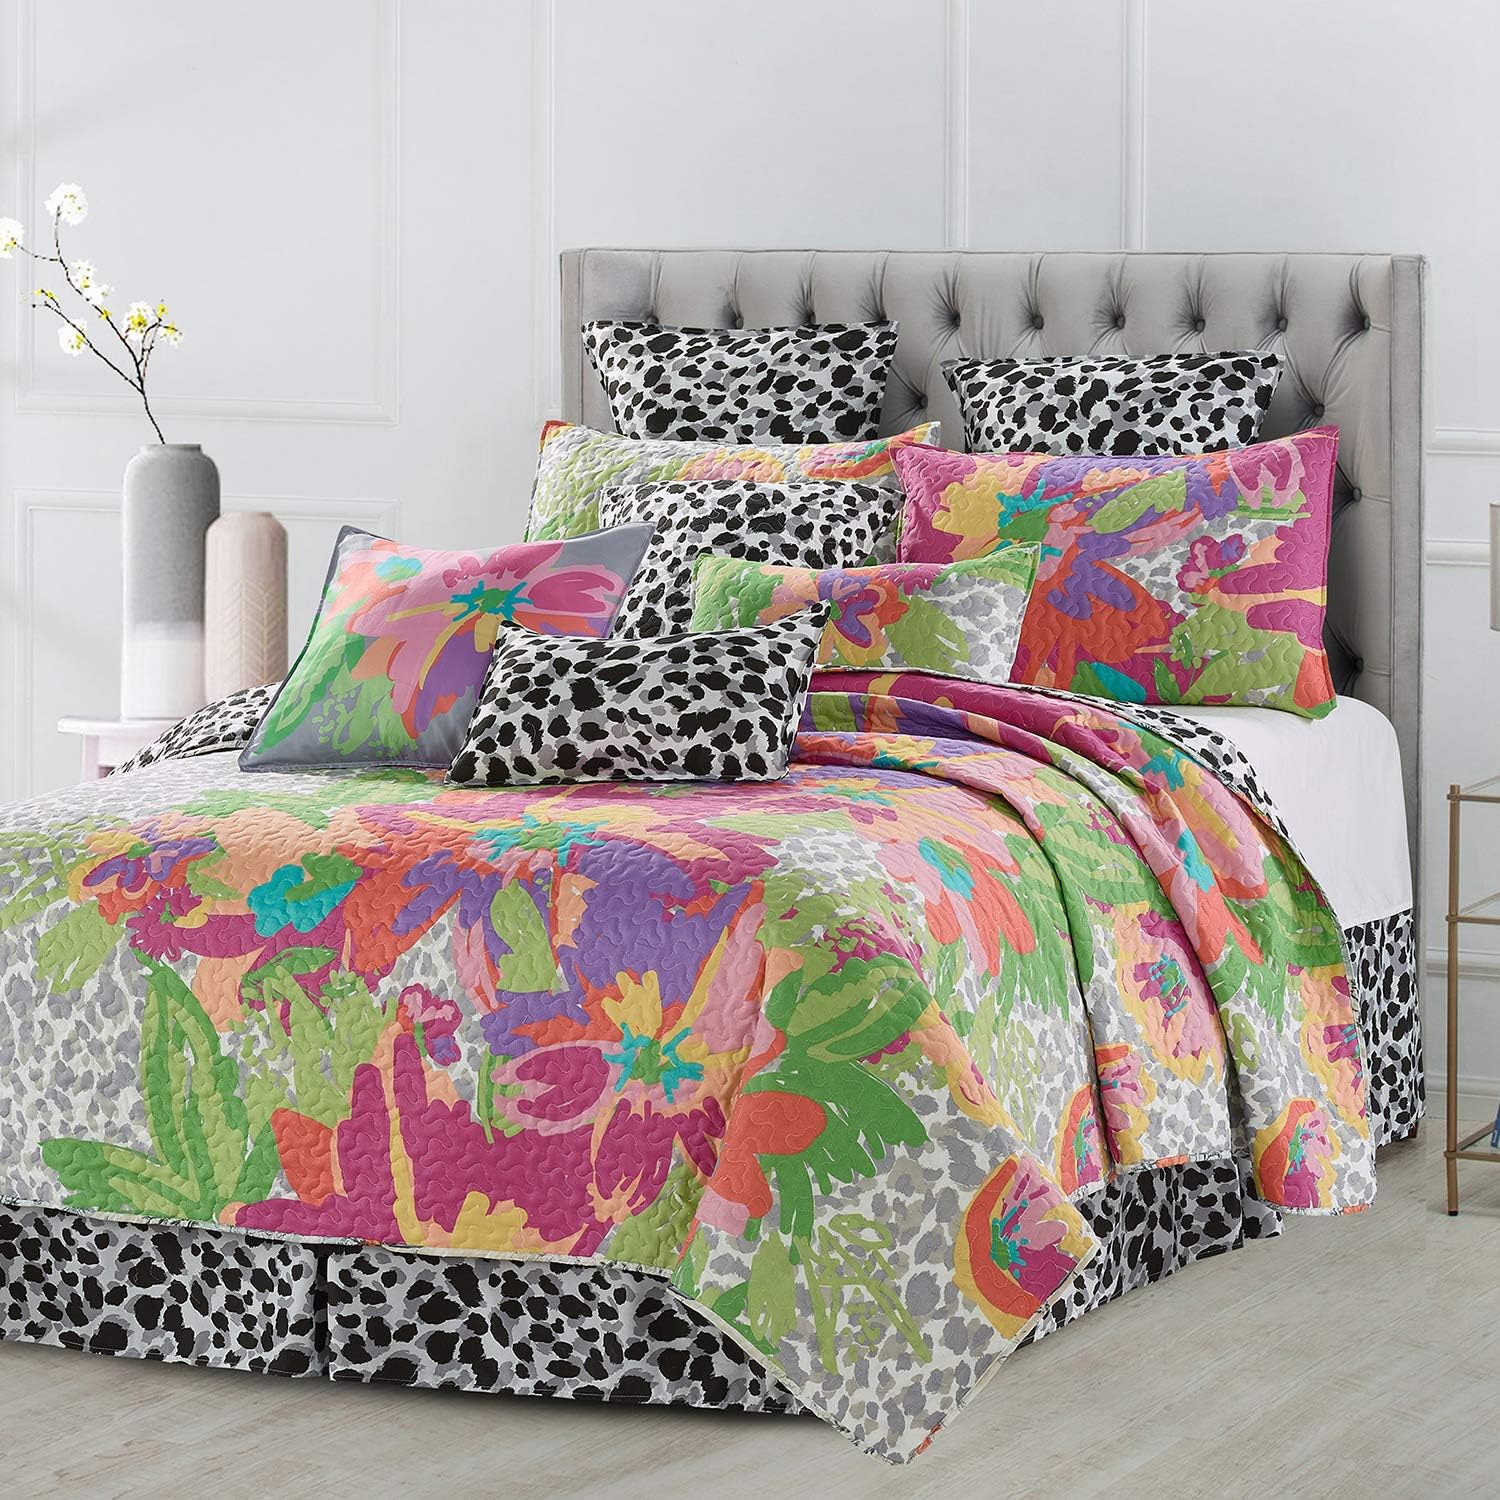 Virah Bella Quilt Bedding Set in King Angelina Printed Lightweight Reversible Quilt with 2 Matching Pillow Shams - Cozy & Beautiful Contemporary-Themed Bedding